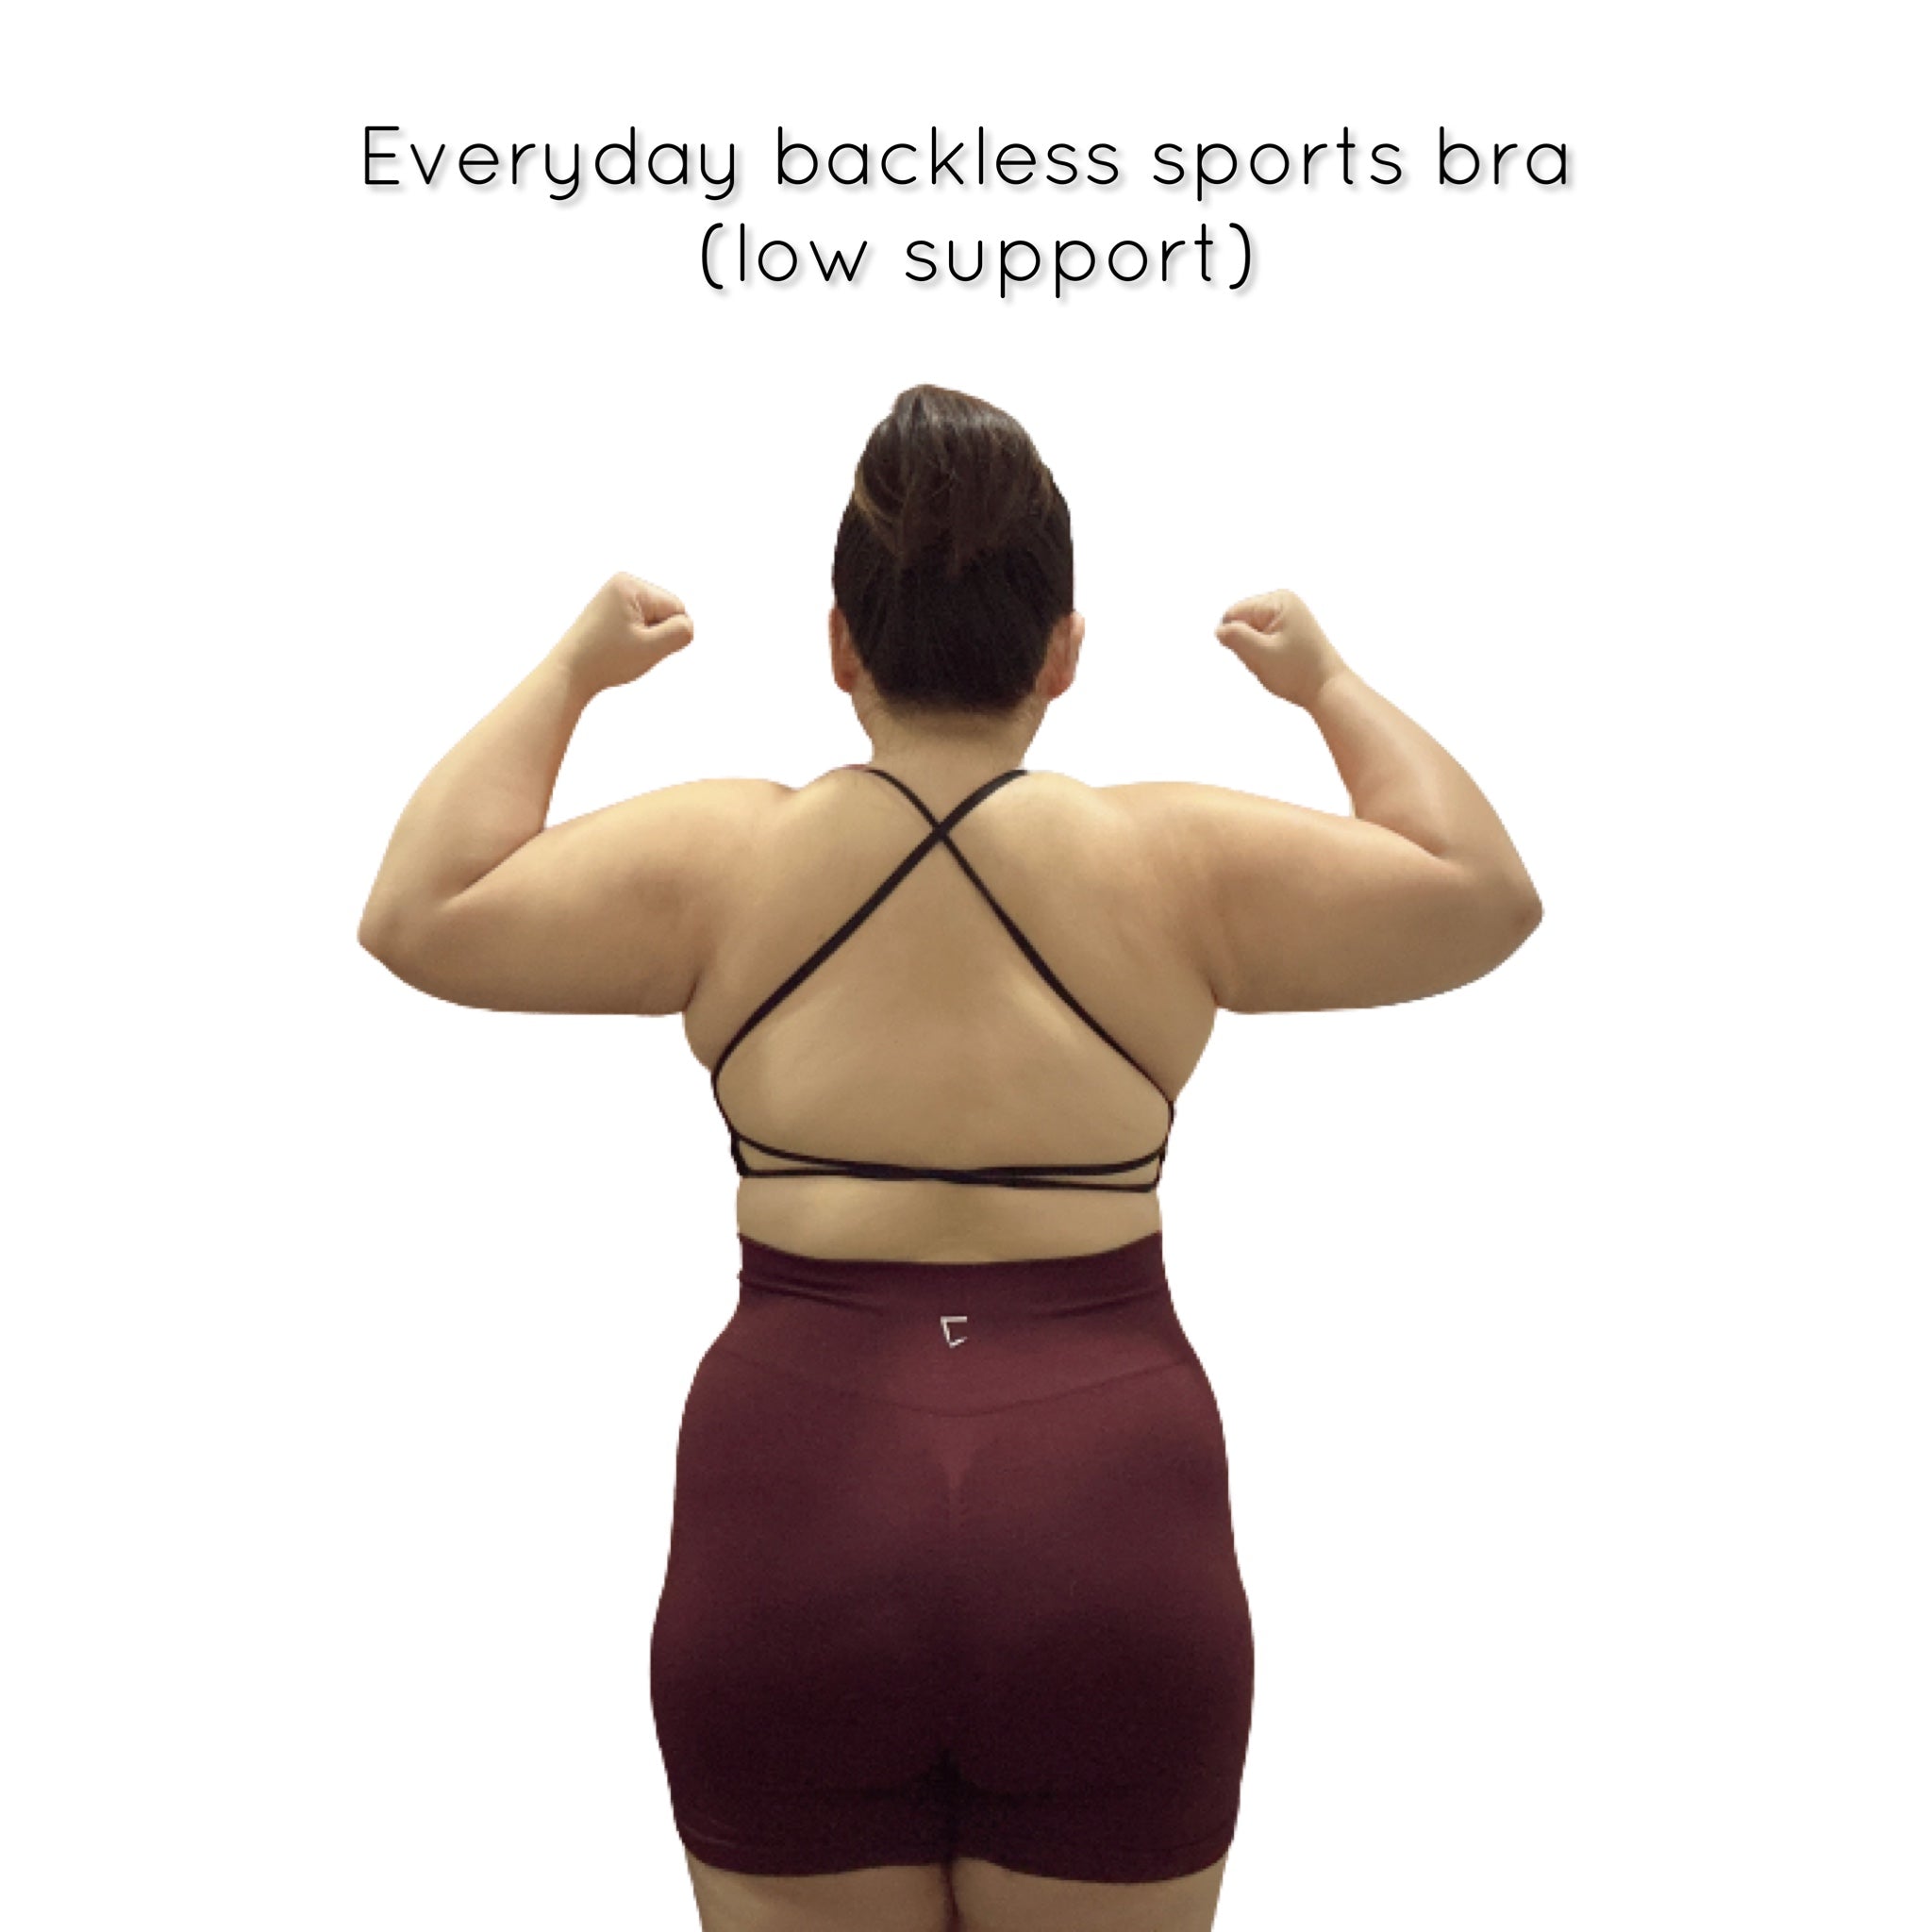 Everyday backless sports bra (low support)